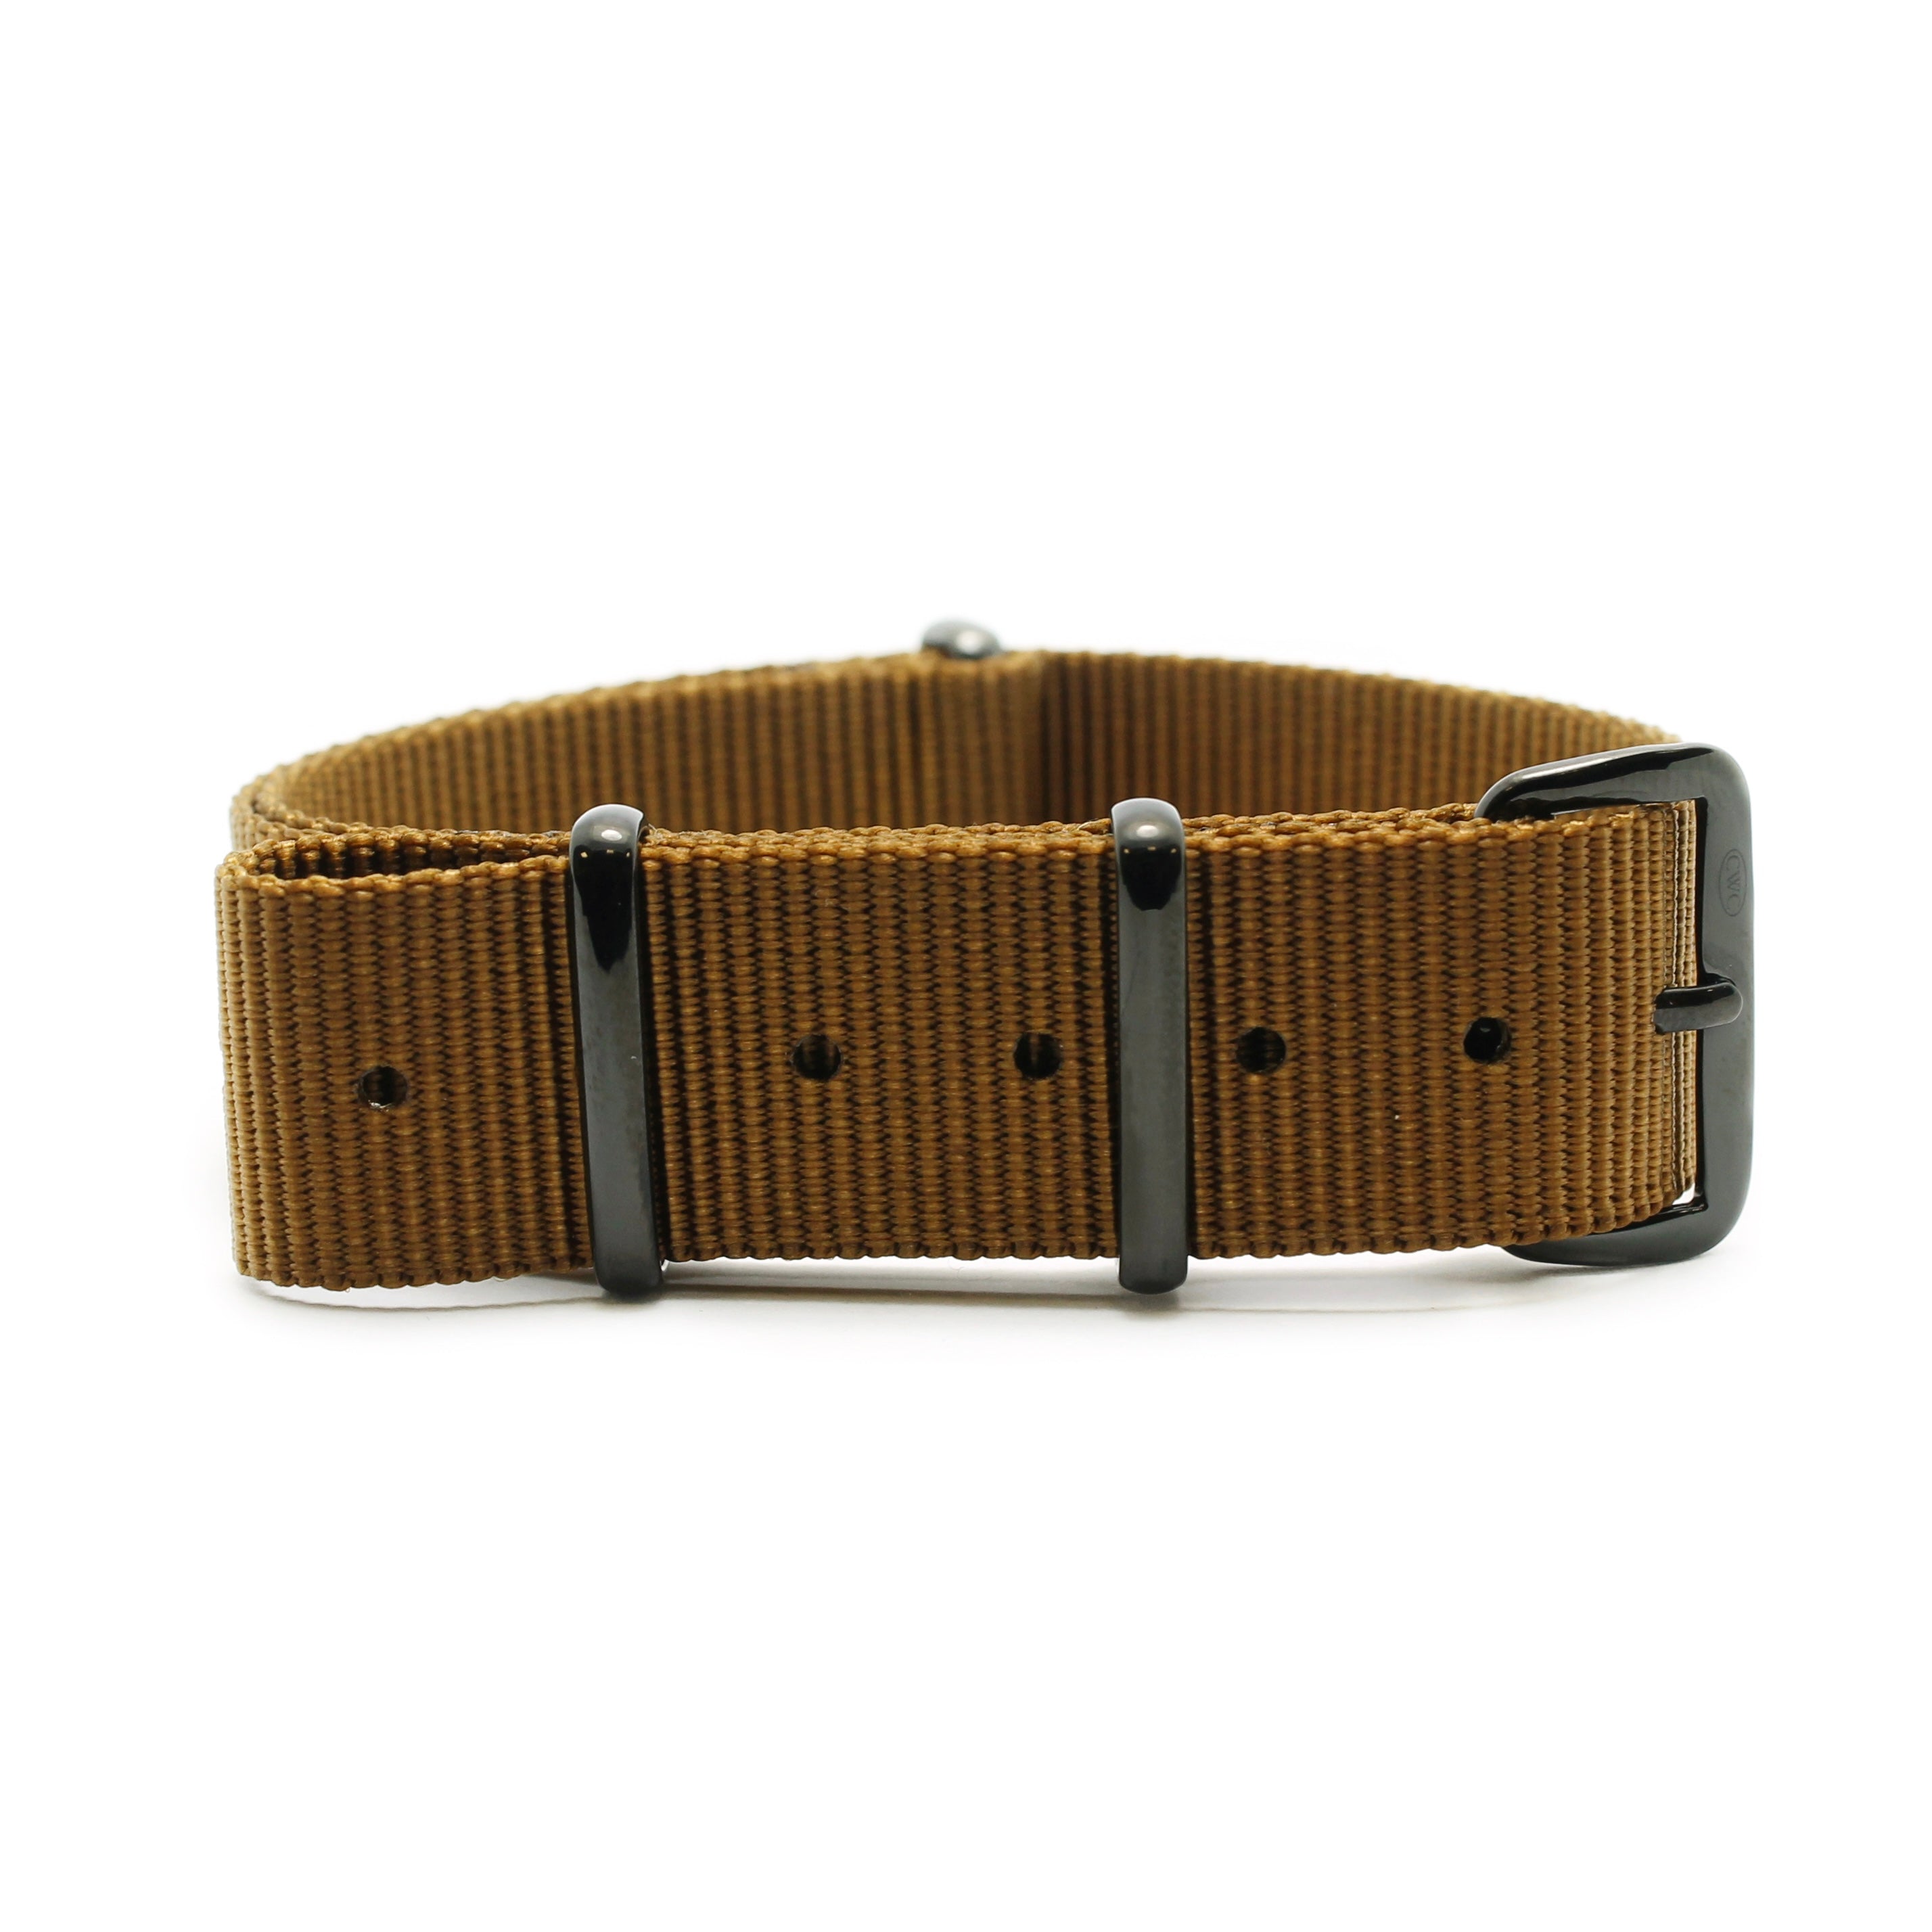 CABOT MILITARY WATCH STRAP - COYOTE WITH GLOSS BLACK BUCKLE